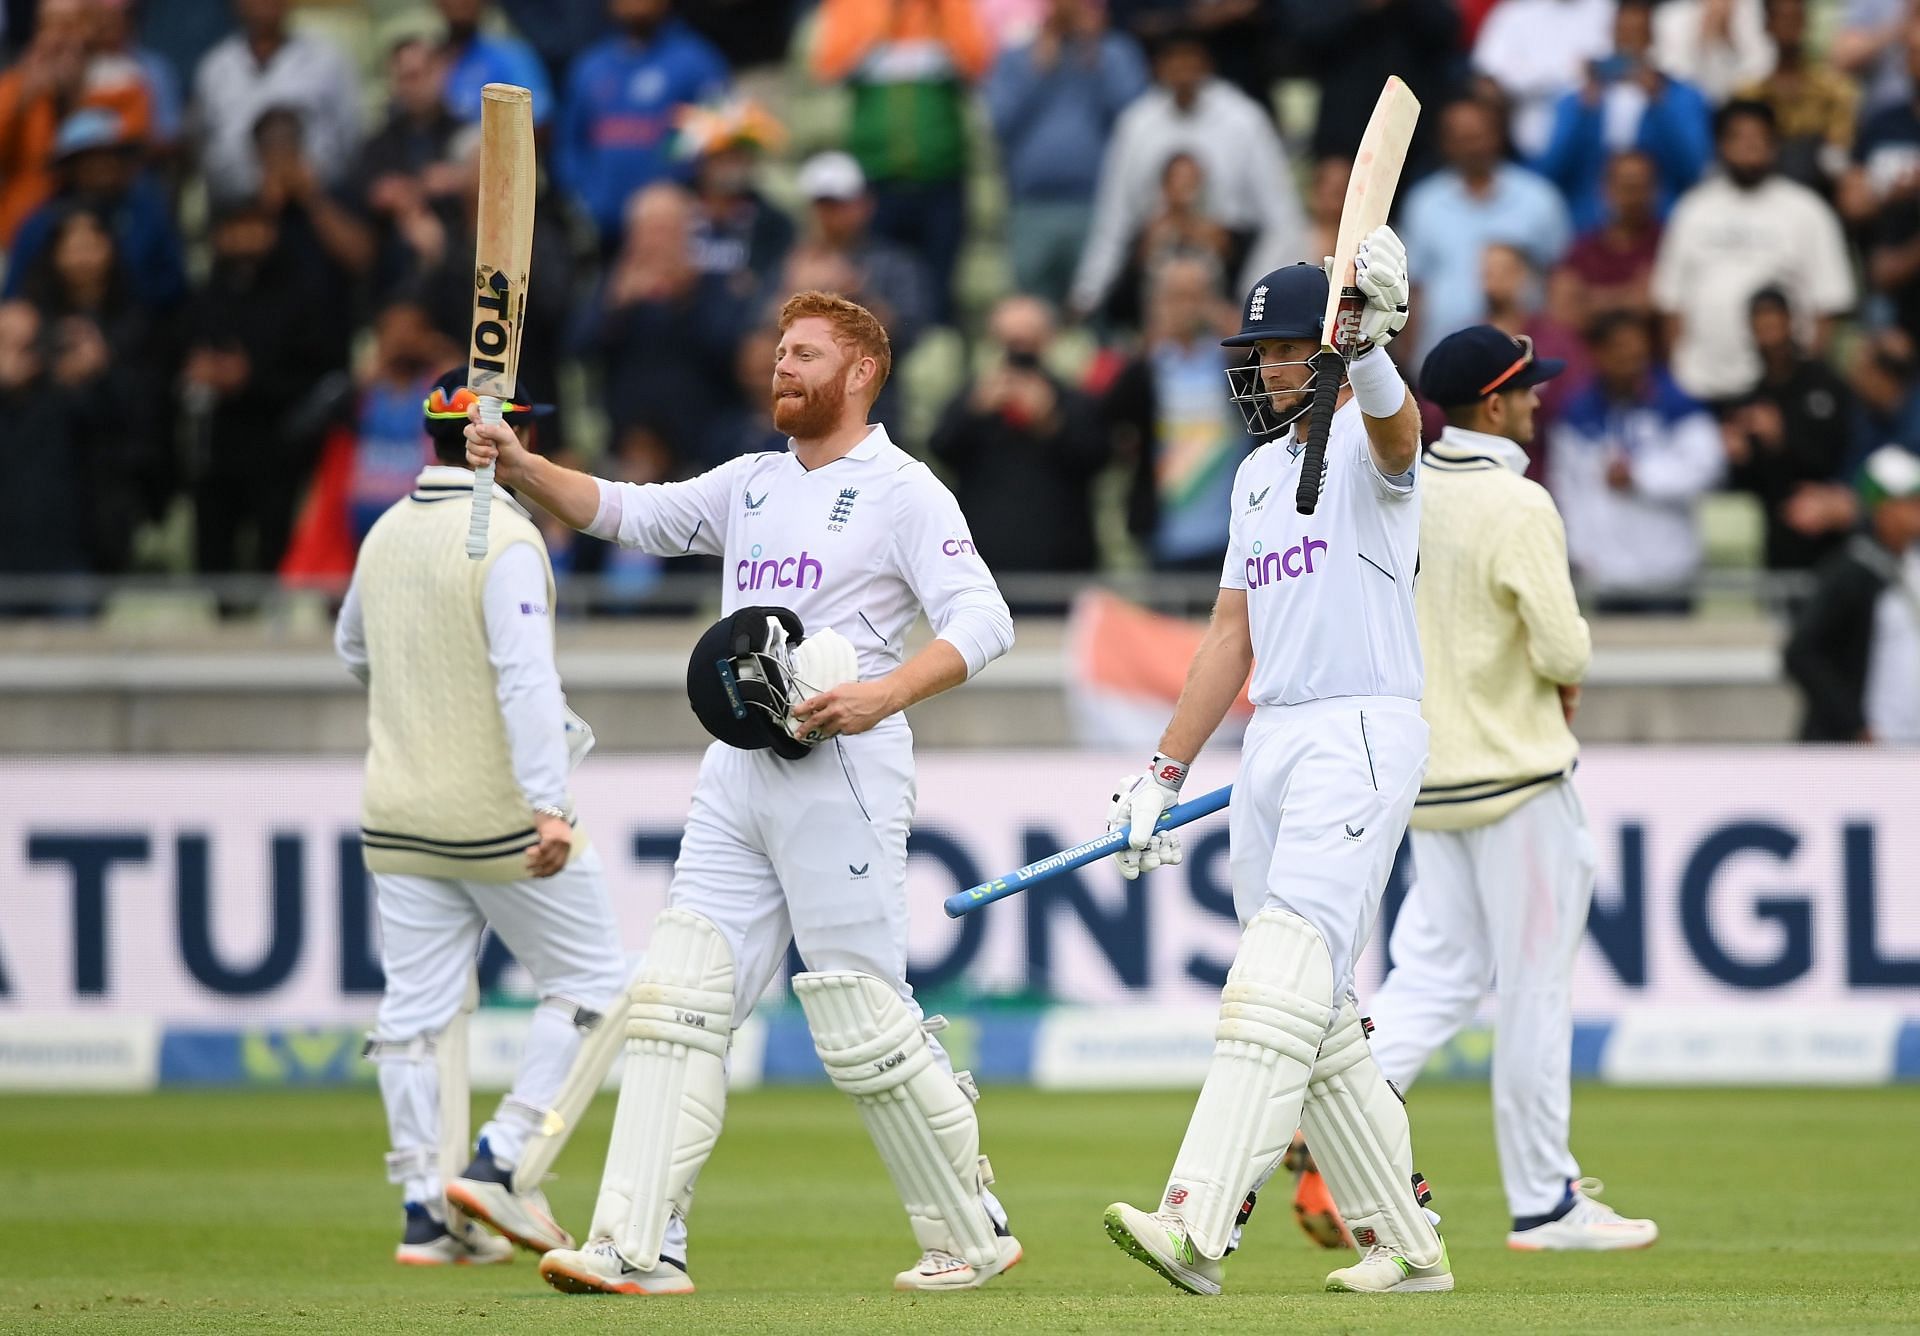 Joe Root and Jonny Bairstow walk off after leading their team to victory in Birmingham. Pic: Getty Images